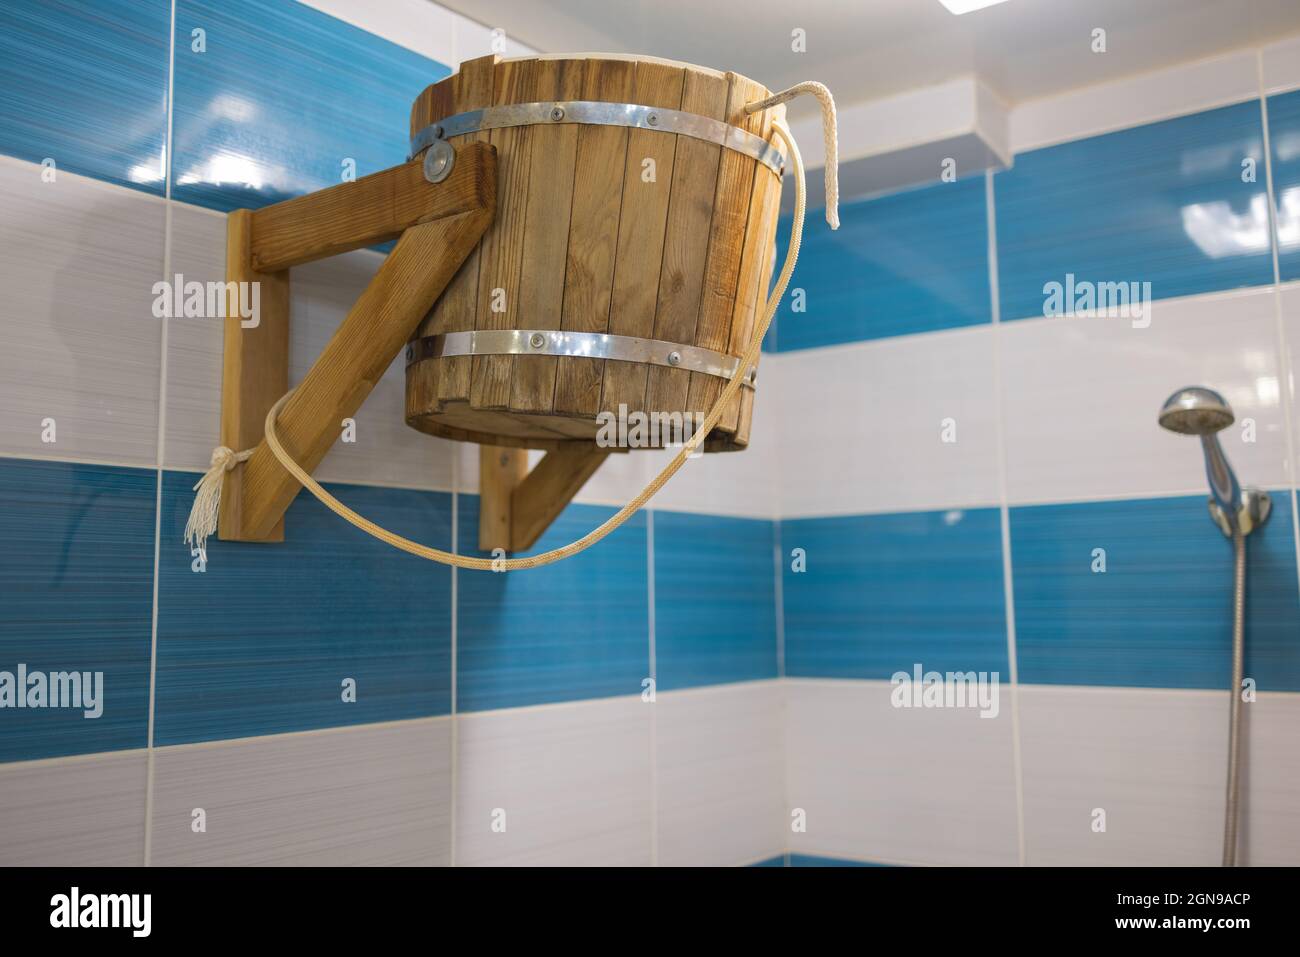 Wooden tipping bucket hangs on stone wall in sauna Stock Photo